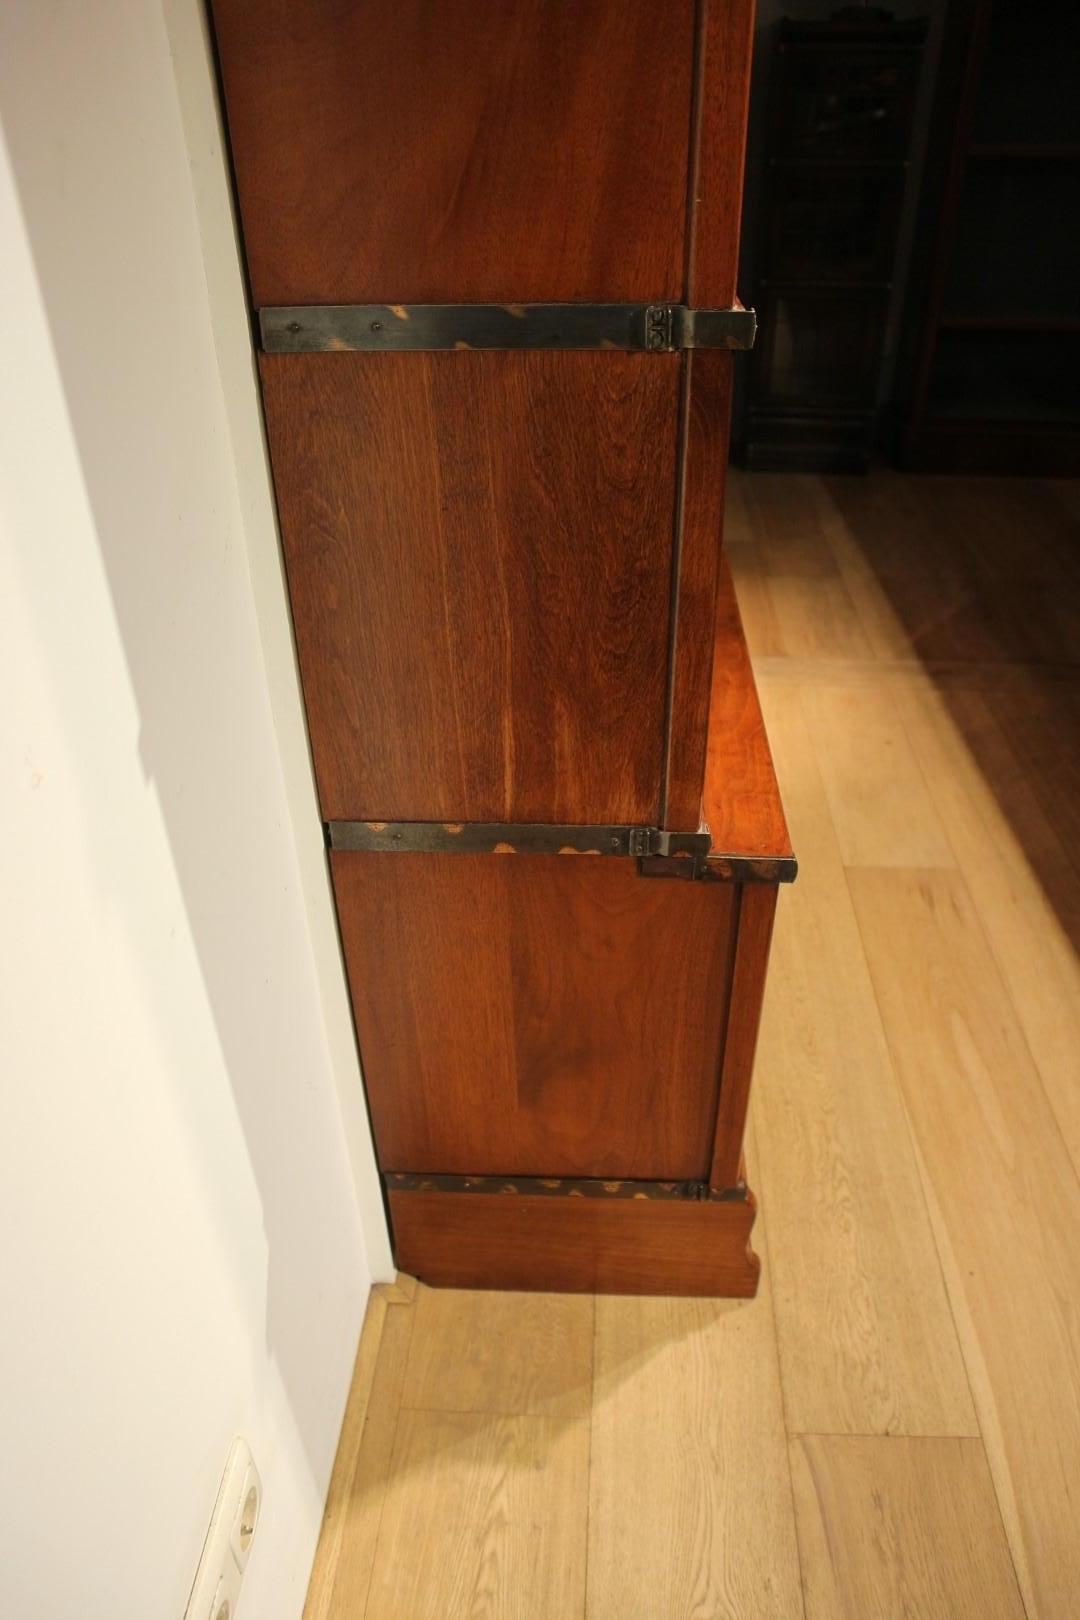 Beautiful antique mahogany Globe Wernicke bookcase. Entirely in perfect condition. The cabinet is made up of 12 stackable elements. The lower elements are deeper (file binder size). Cabinets can be used for multiple purposes. As a bookcase, display